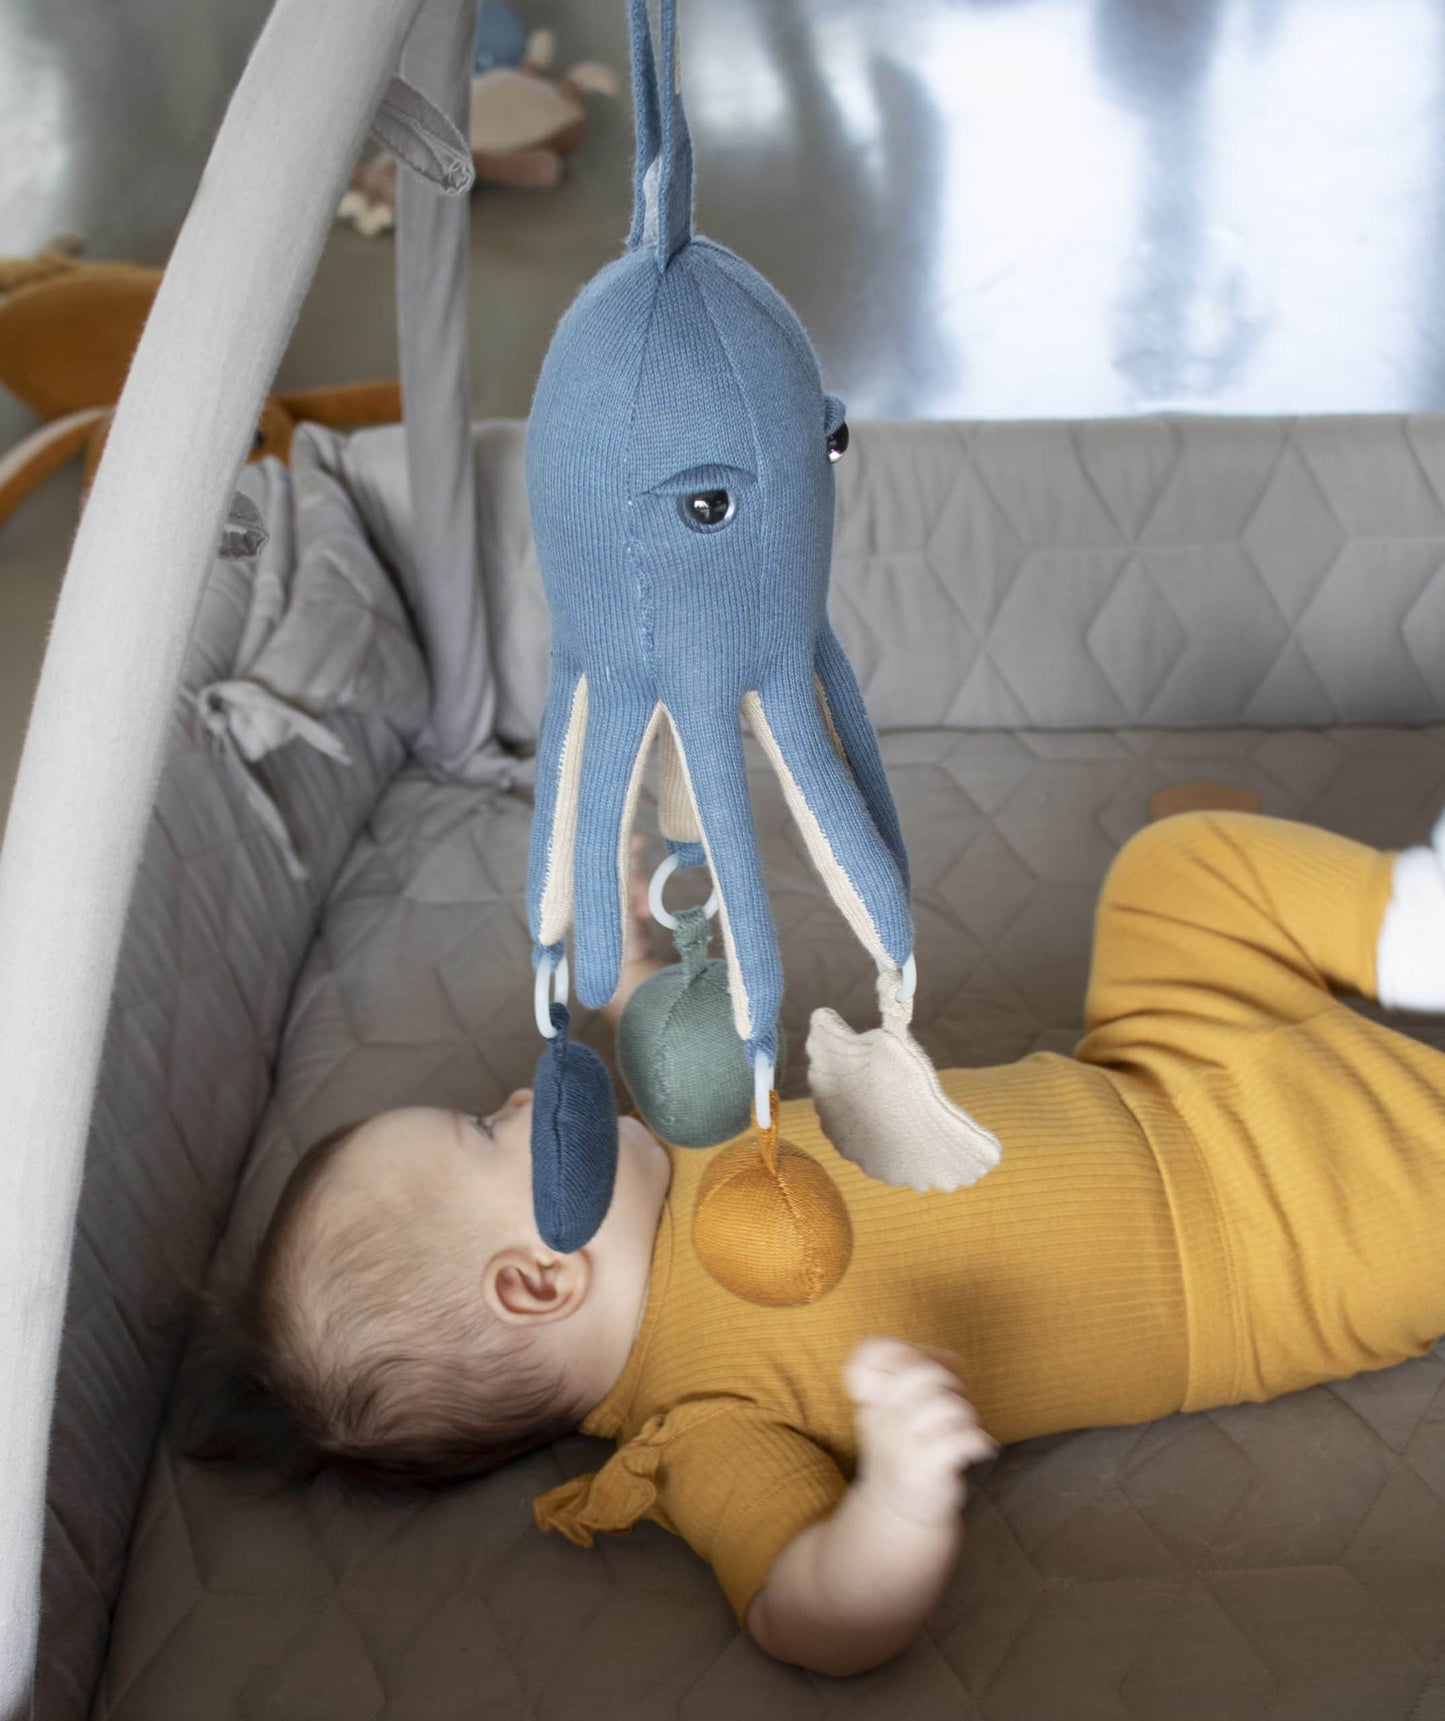 Otto the octopus touch & play baby activity toy